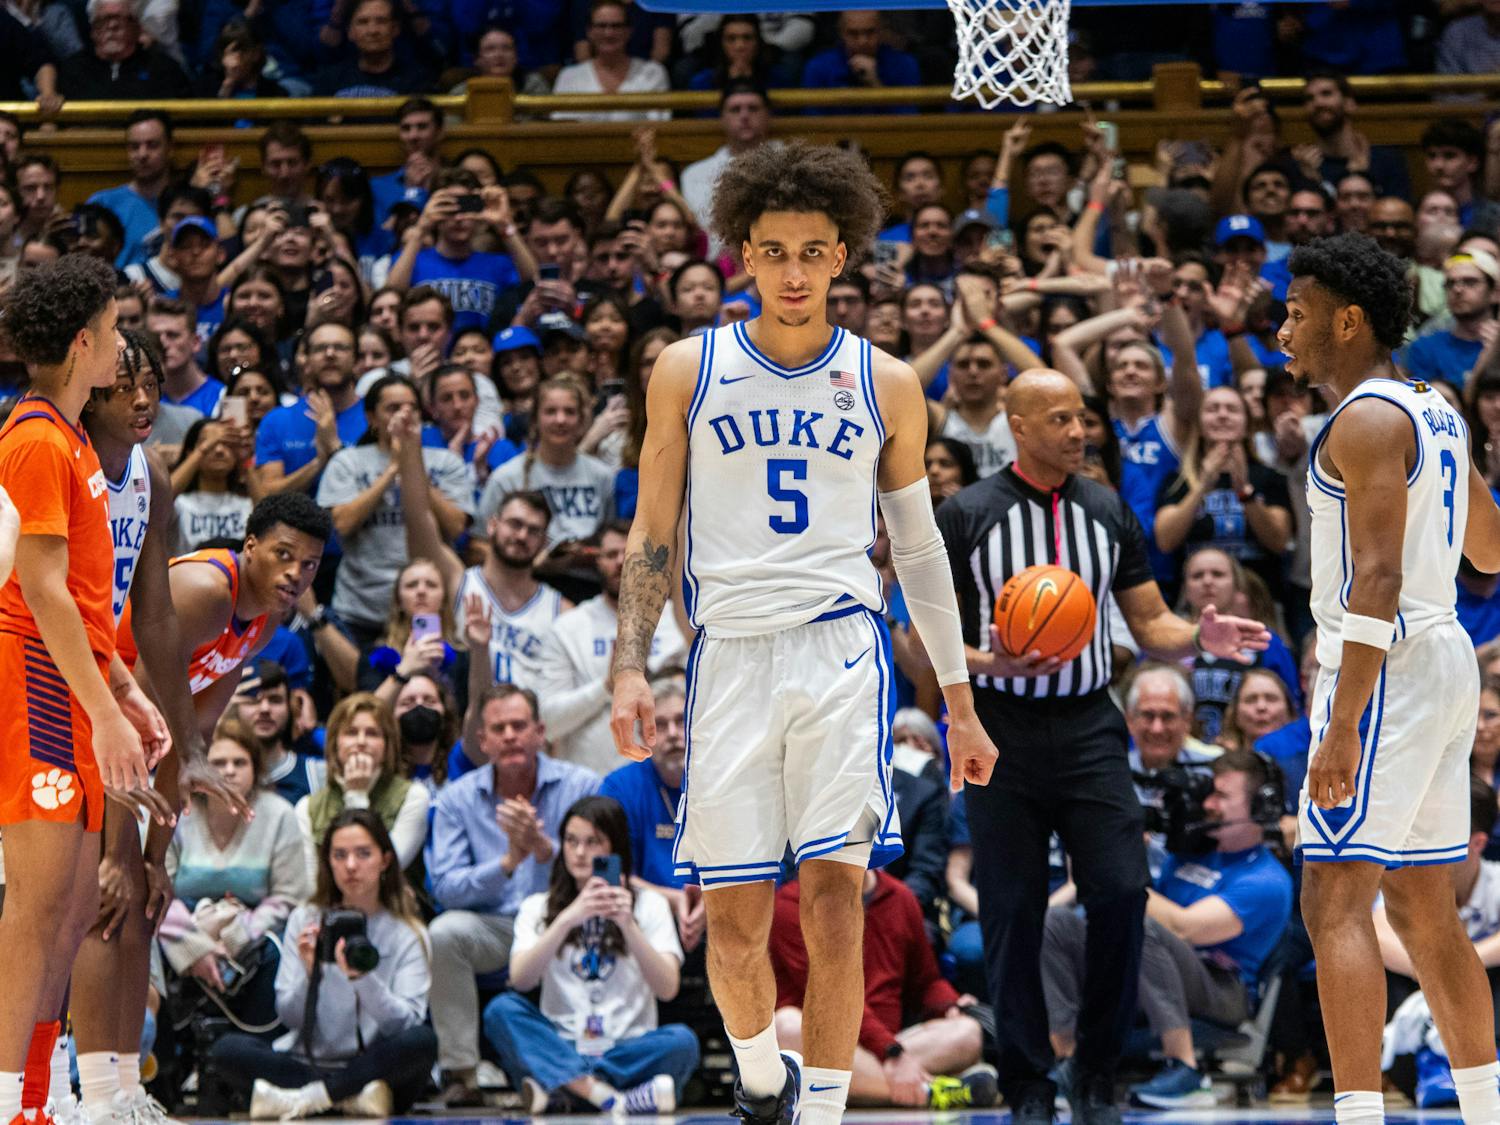 Tyrese Proctor gears up for a free-throw during Duke's game against Clemson Jan. 27.